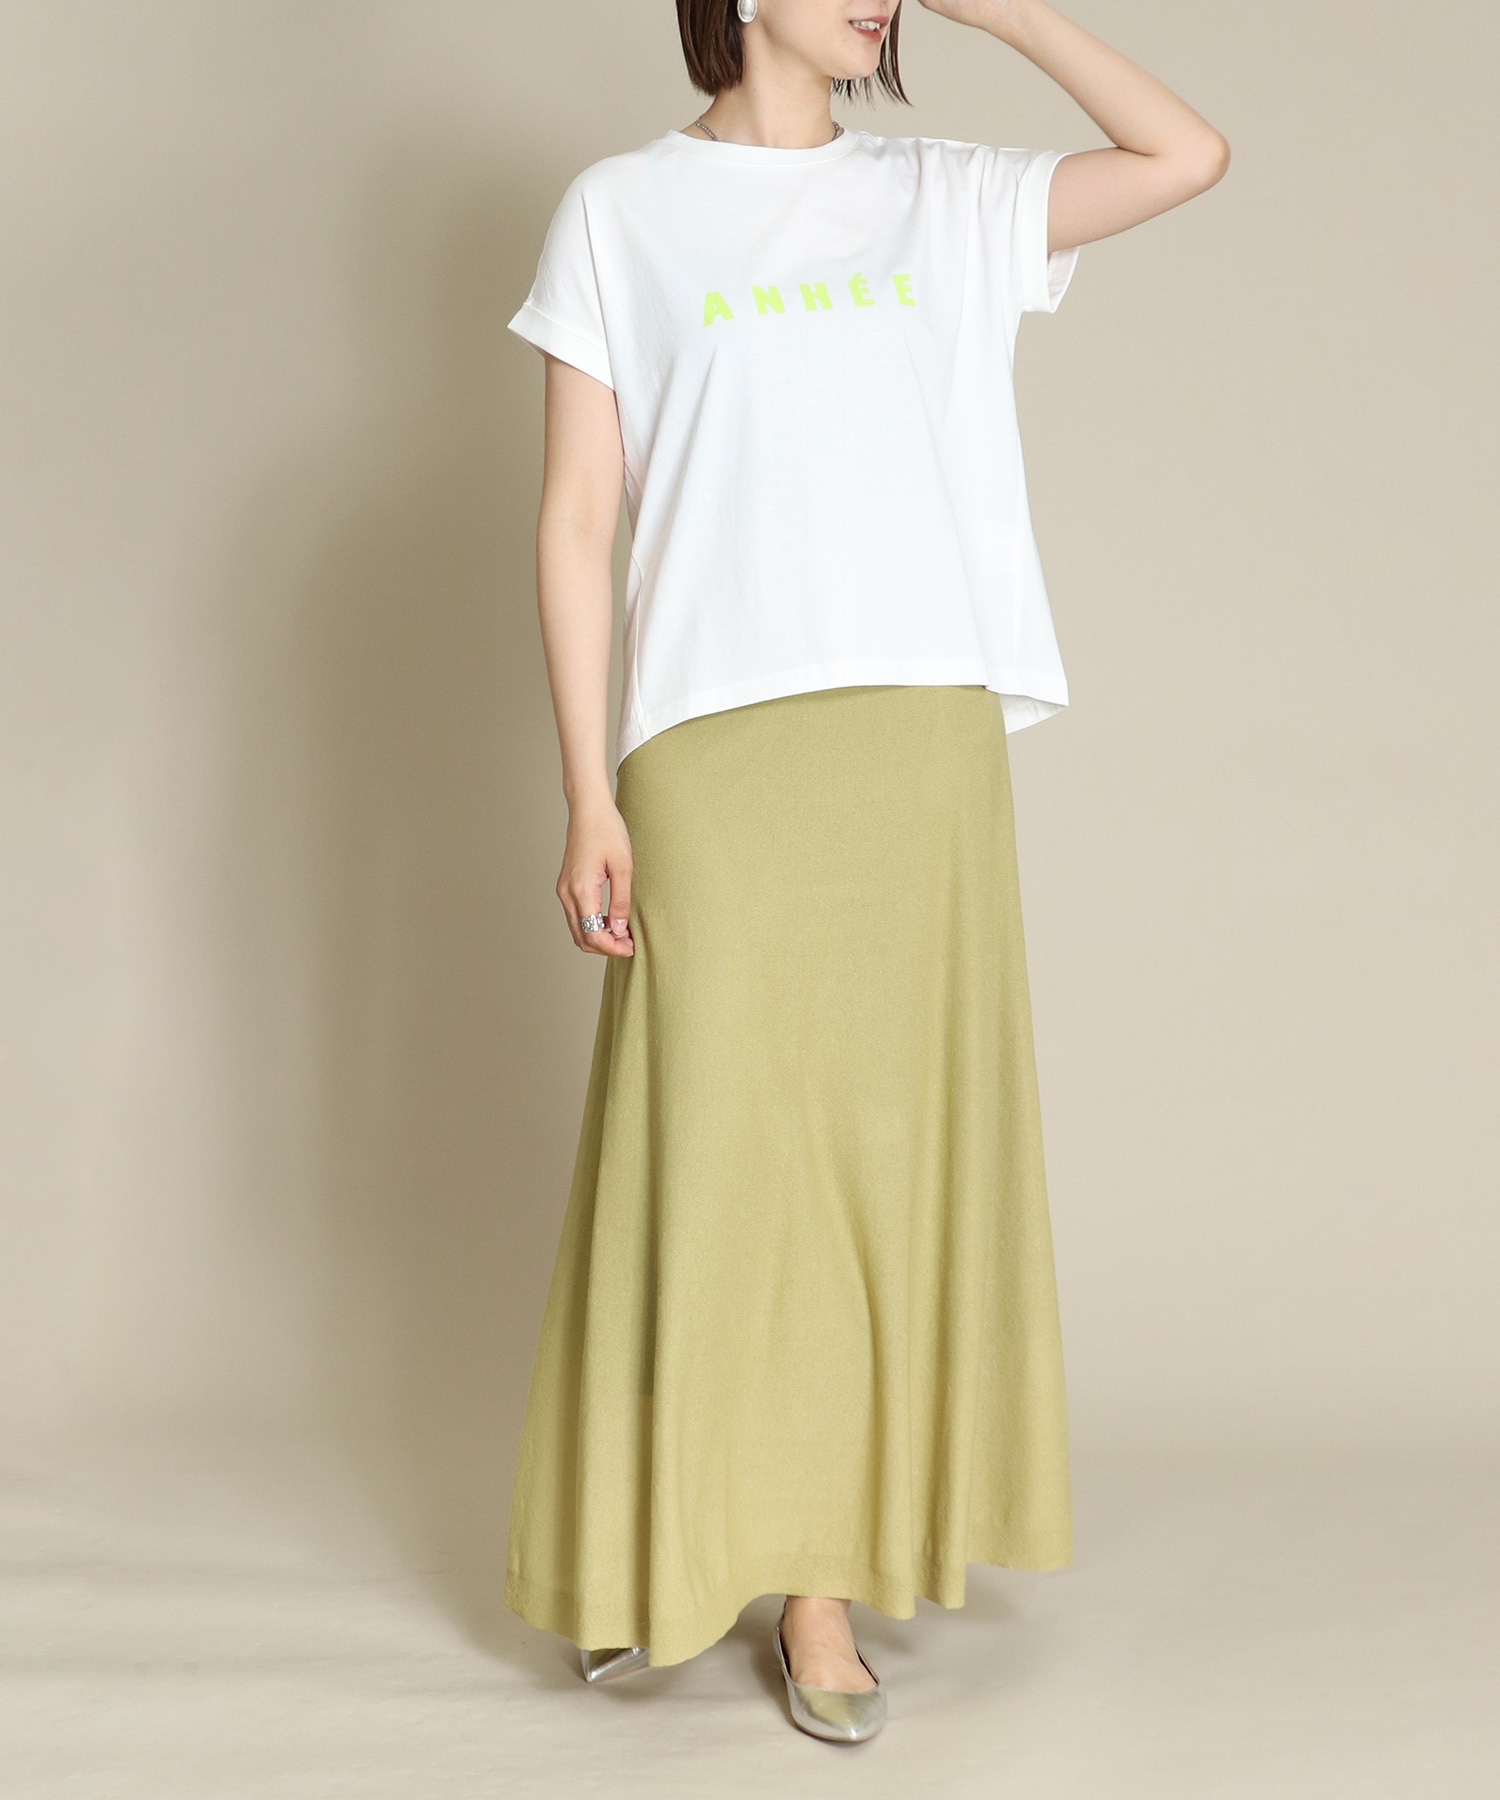 ANHEEロゴTシャツ